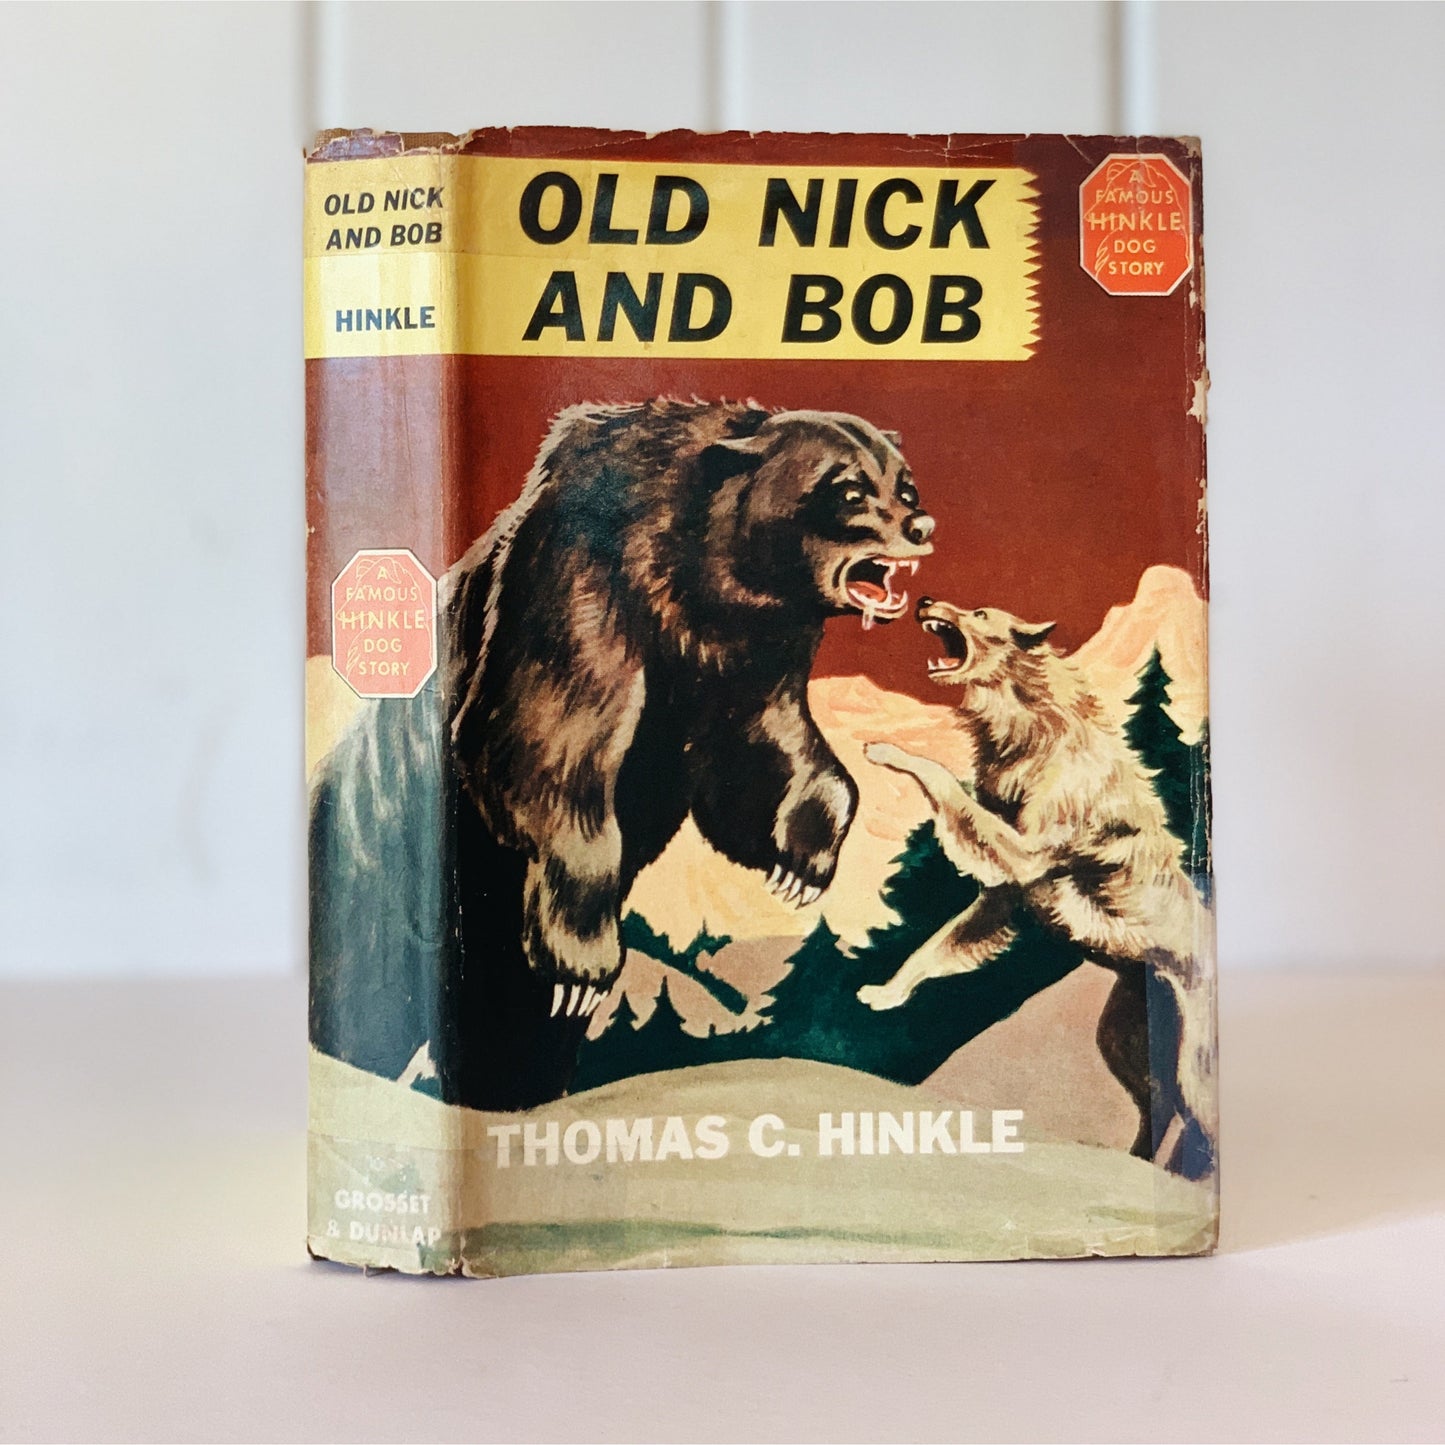 Old Nick and Bob - A Famous Hinkle Dog Story, 1941, Hardcover